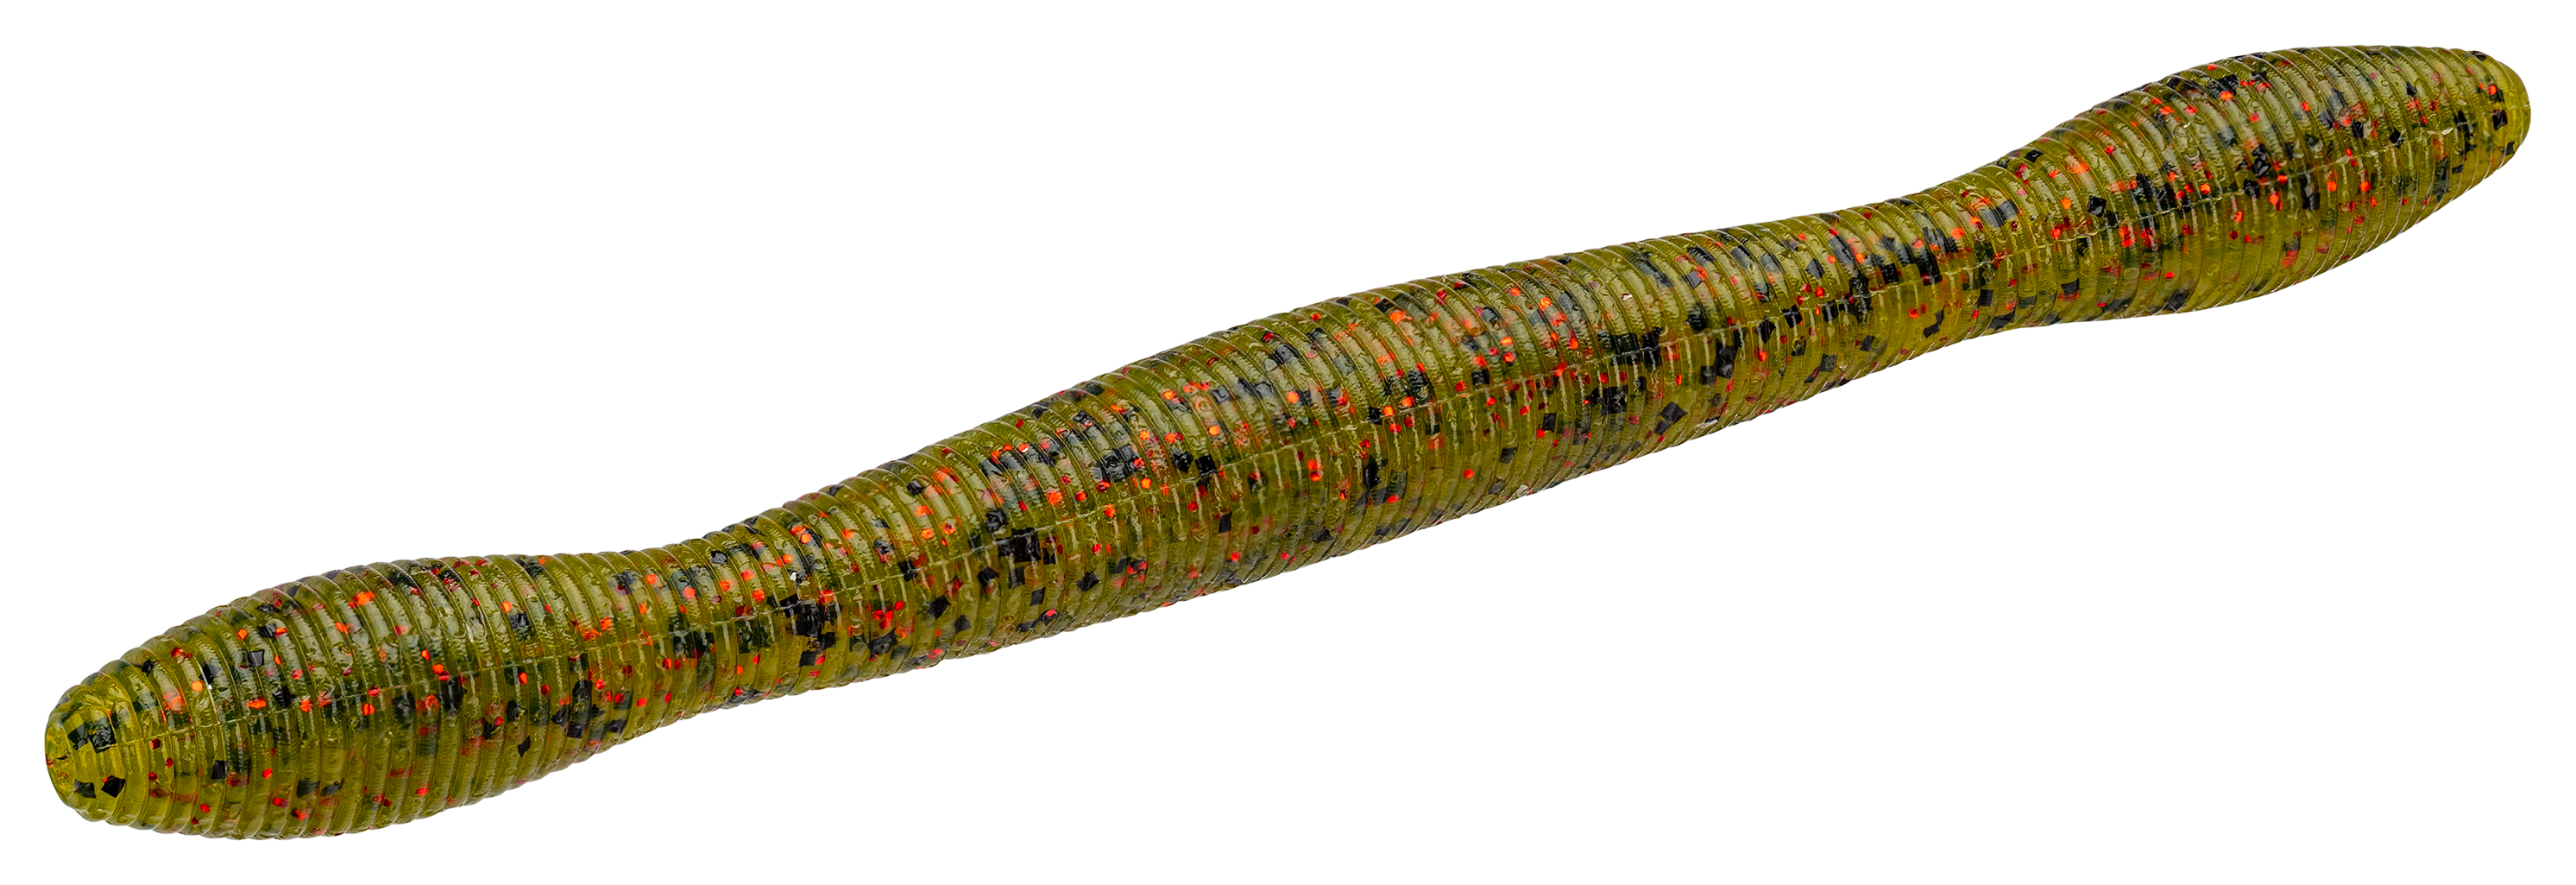 Tailored Tackle Wacky Worm 5 inch | 25 Pack Bulk Bag | Soft Plastic Stick Bait Made in USA | Anise Scent Fishing Worms for Wacky Rig Bass Lures | 8